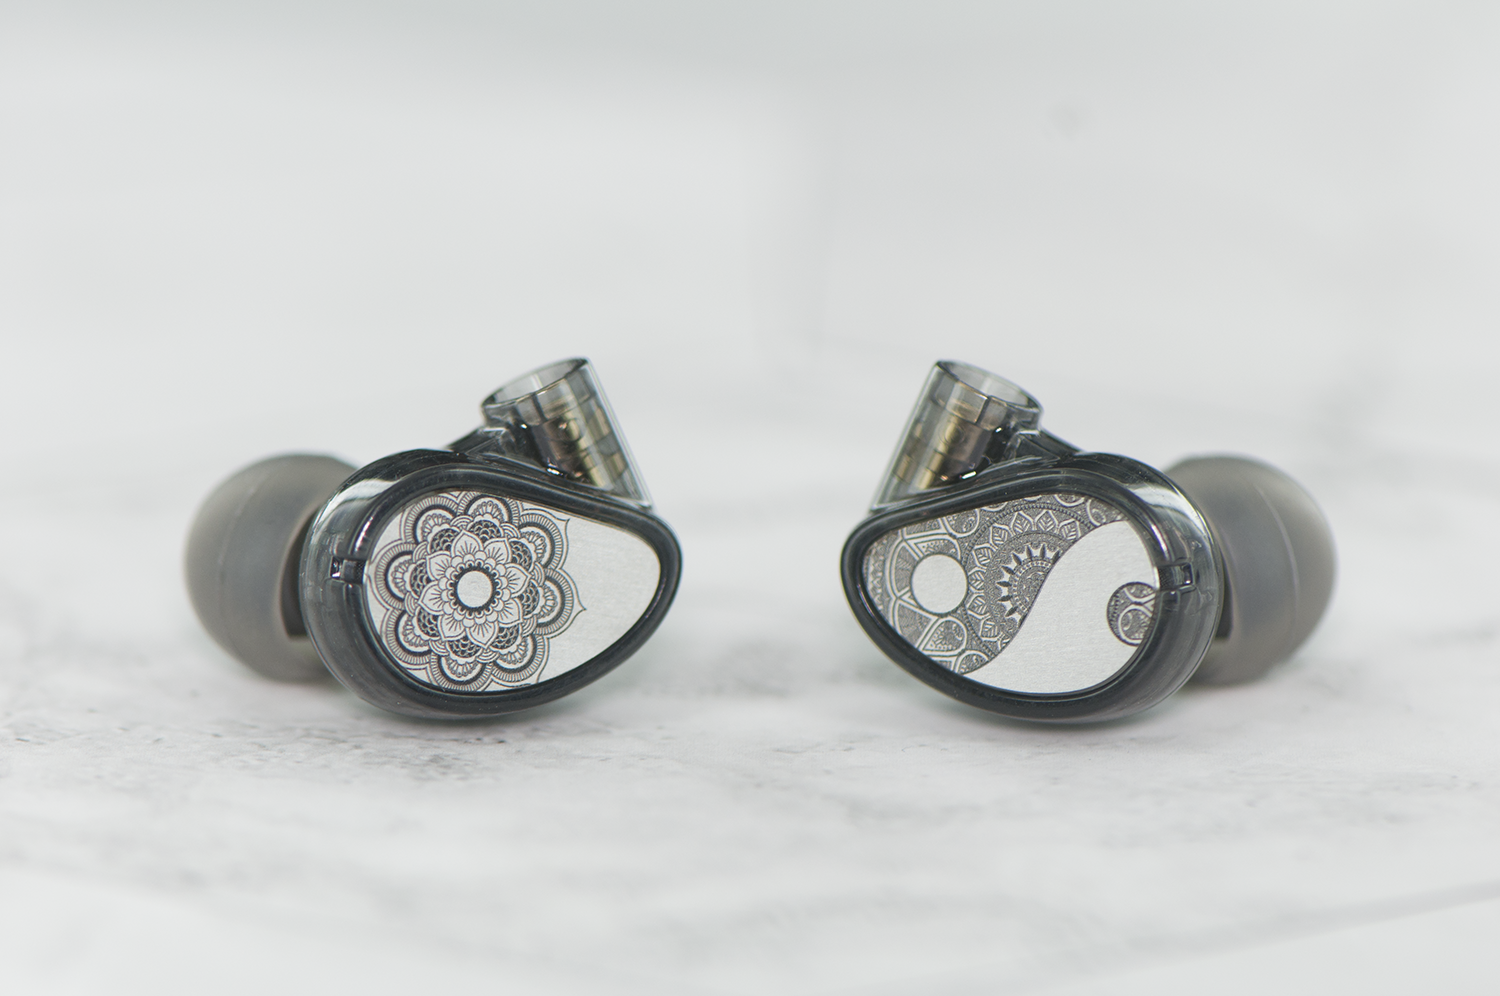 Two in-ear monitors with decorative silver and black floral designs on a white marble background.